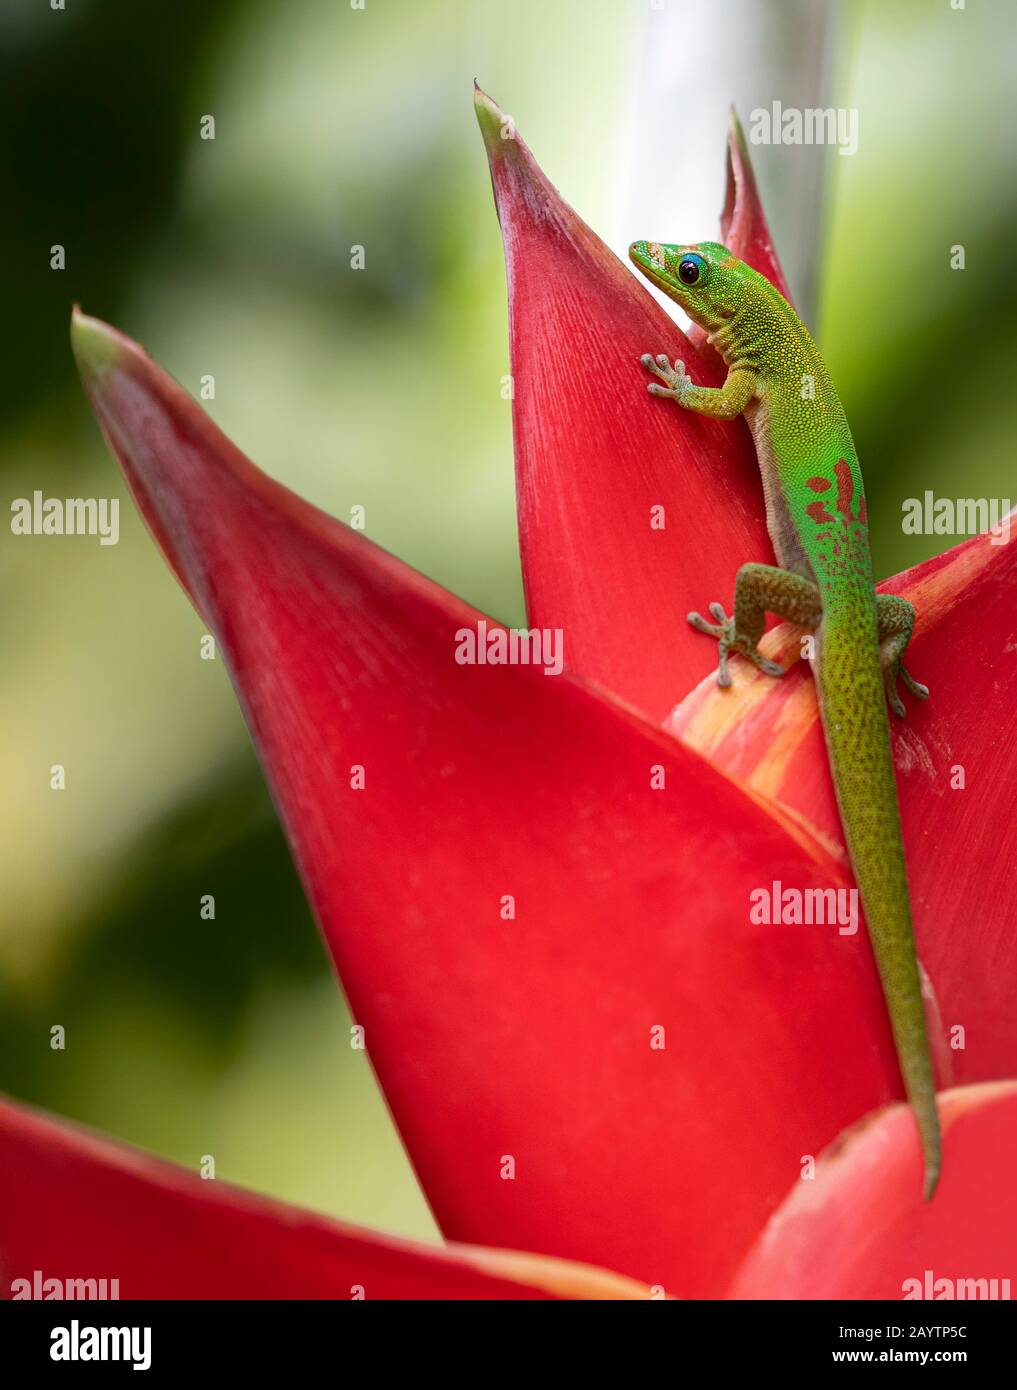 Close-up view of Gold dust day gecko (Phelsuma laticauda) sitting on a Heliconia Stock Photo